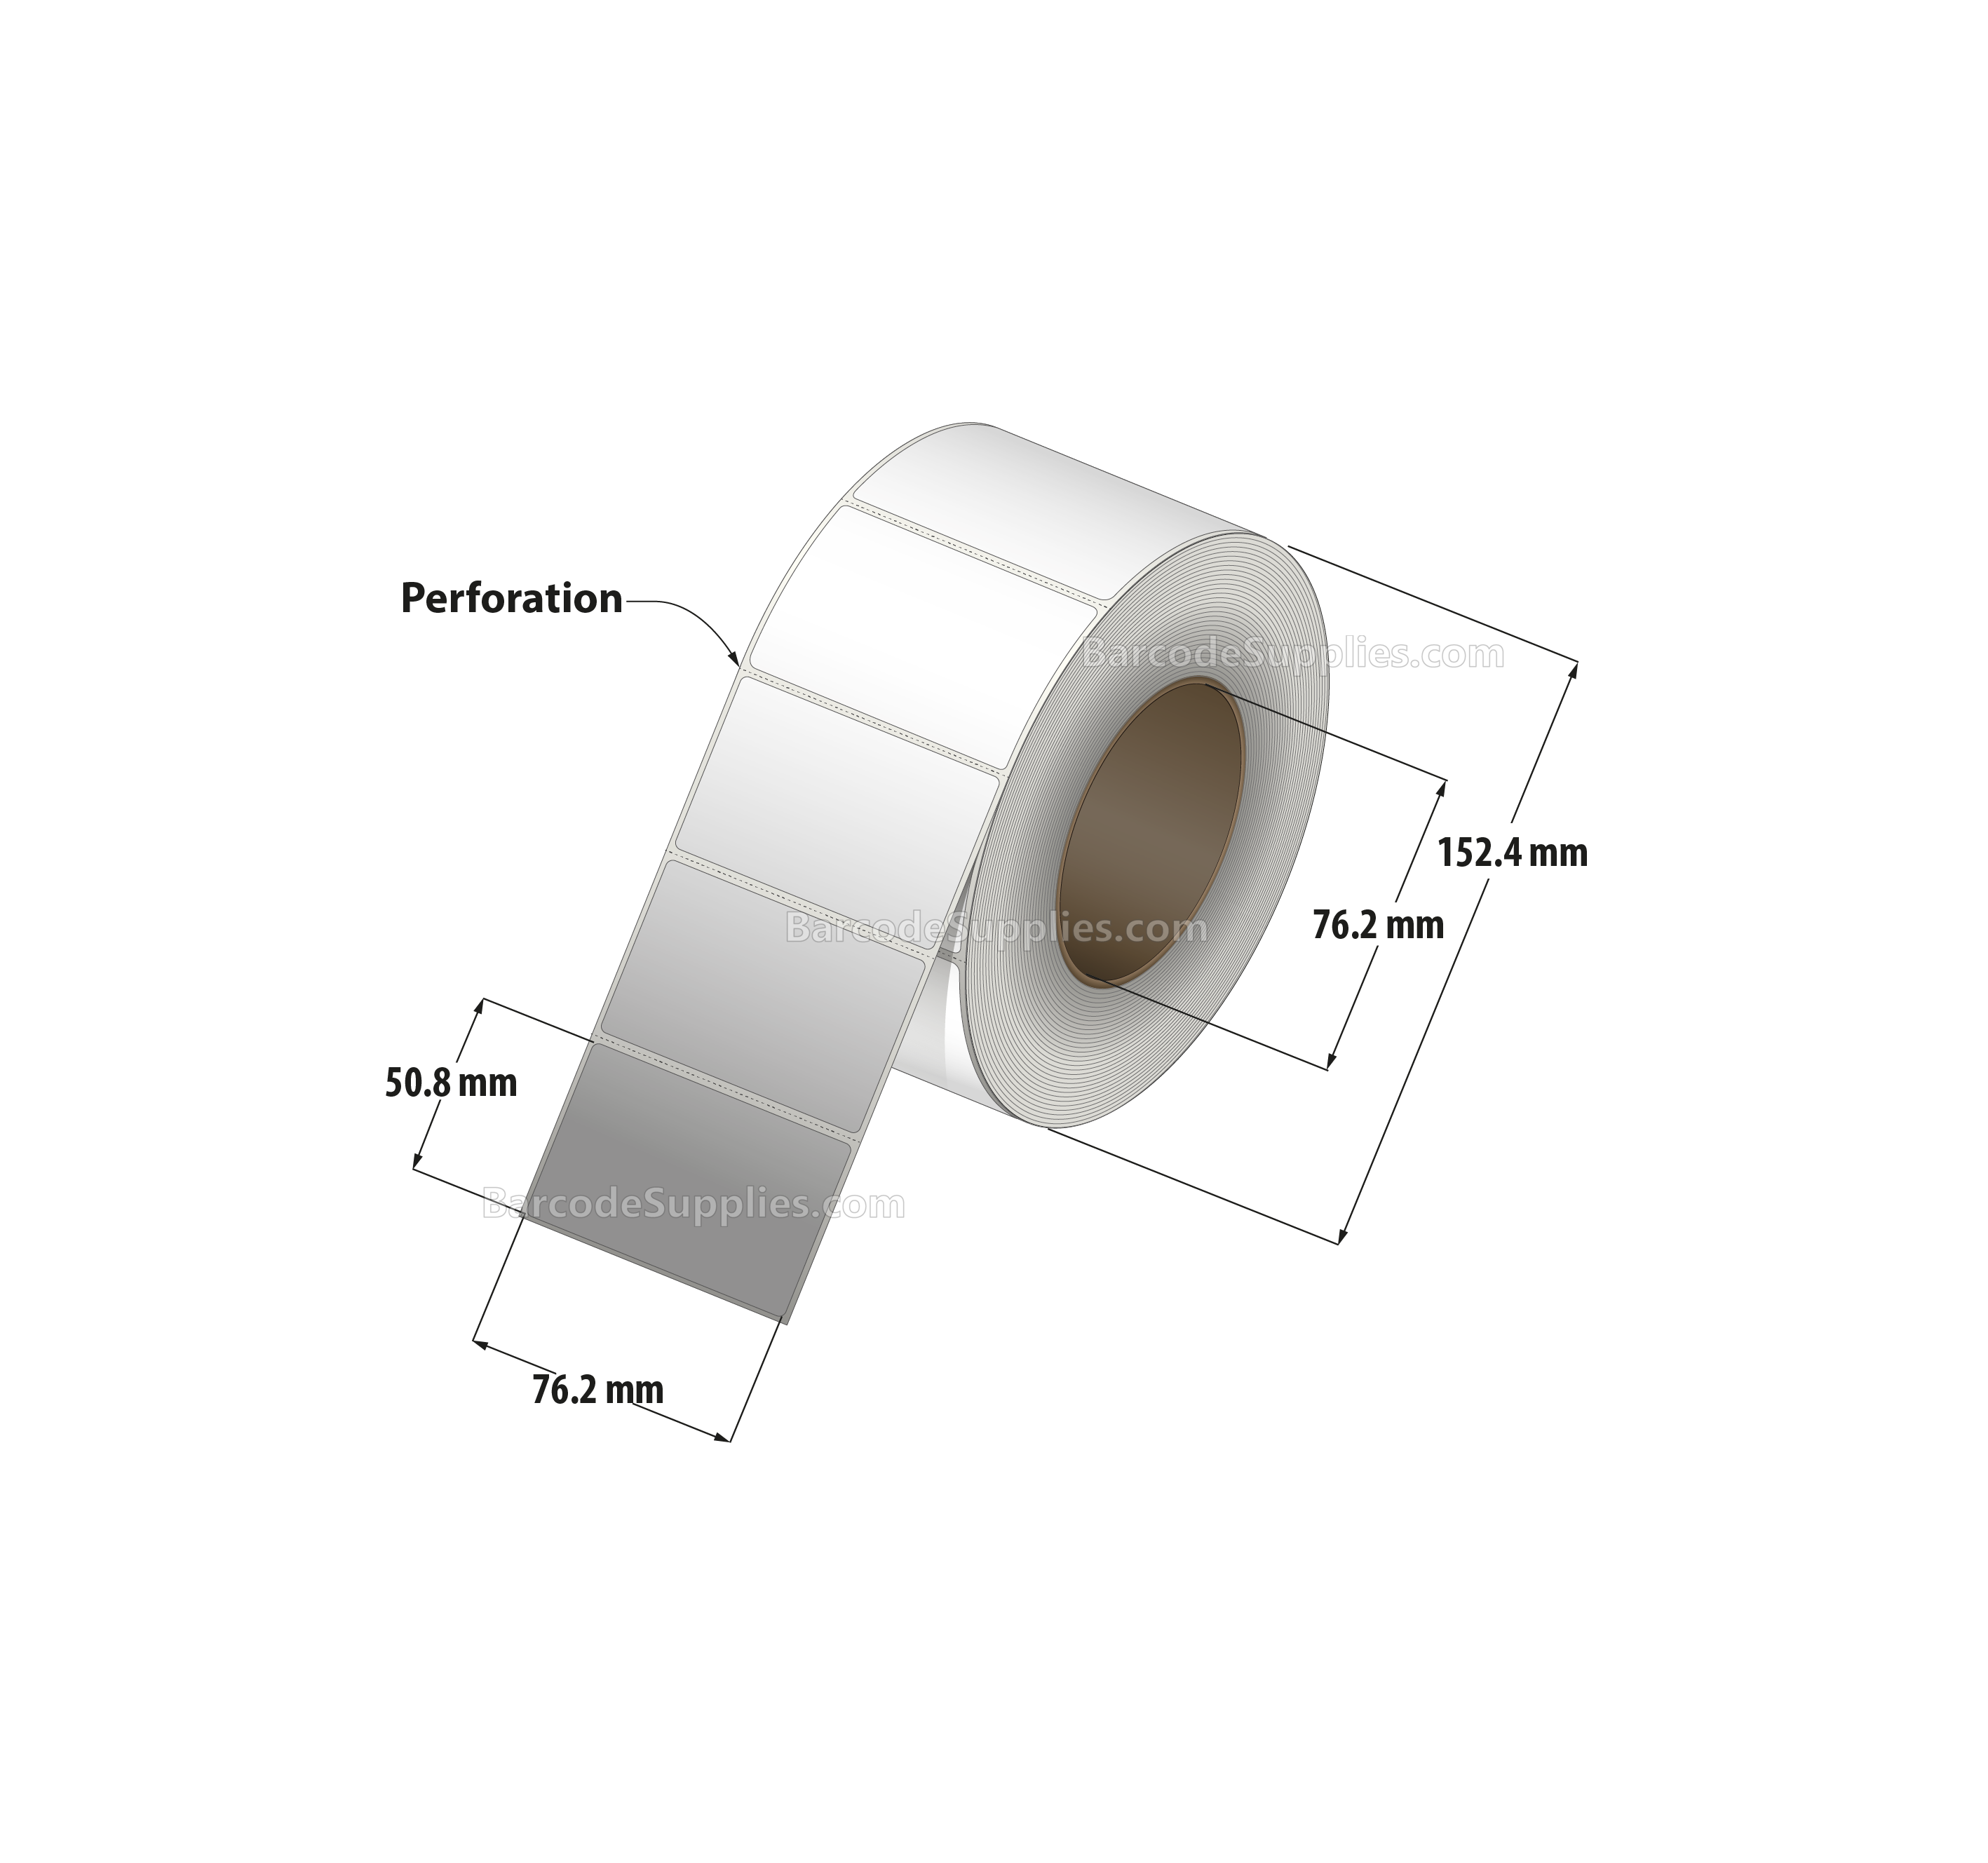 3 x 2 Thermal Transfer White Labels With Permanent Adhesive - Perforated - 1475 Labels Per Roll - Carton Of 8 Rolls - 11800 Labels Total - MPN: RT-3-2-1475-3